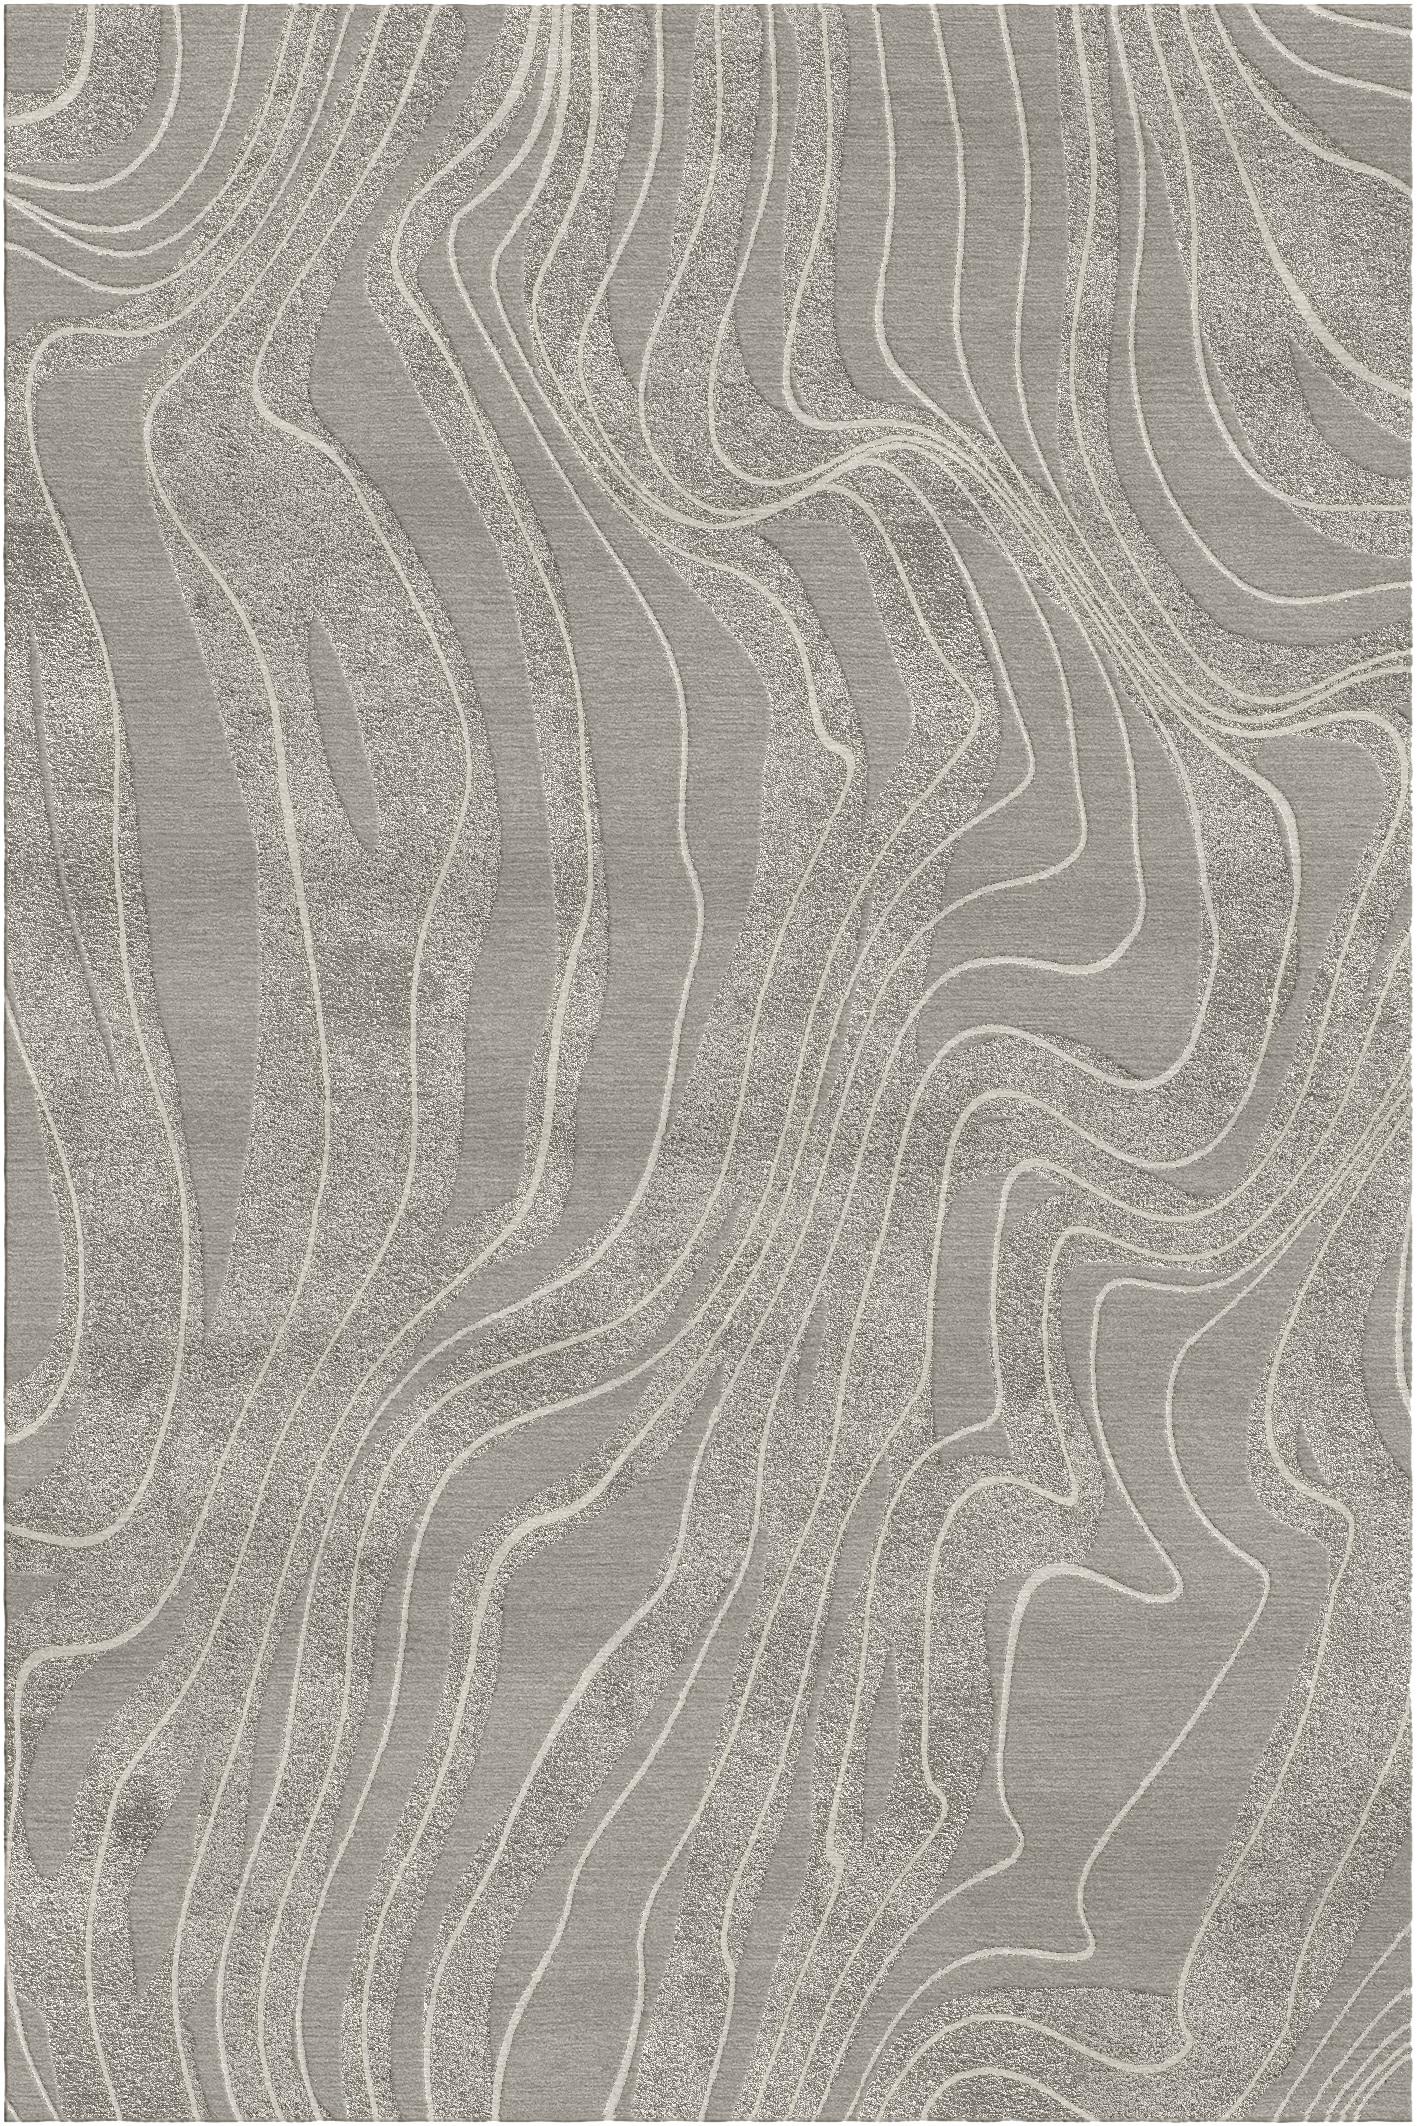 Deserto rug I by Giulio Brambilla
Dimensions: D 300 x W 200 x H 1.5 cm
Materials: NZ wool, bamboo silk
Available in other color.

A captivating motif of sinuous lines swirling over a soft background defines this sophisticated rug that will